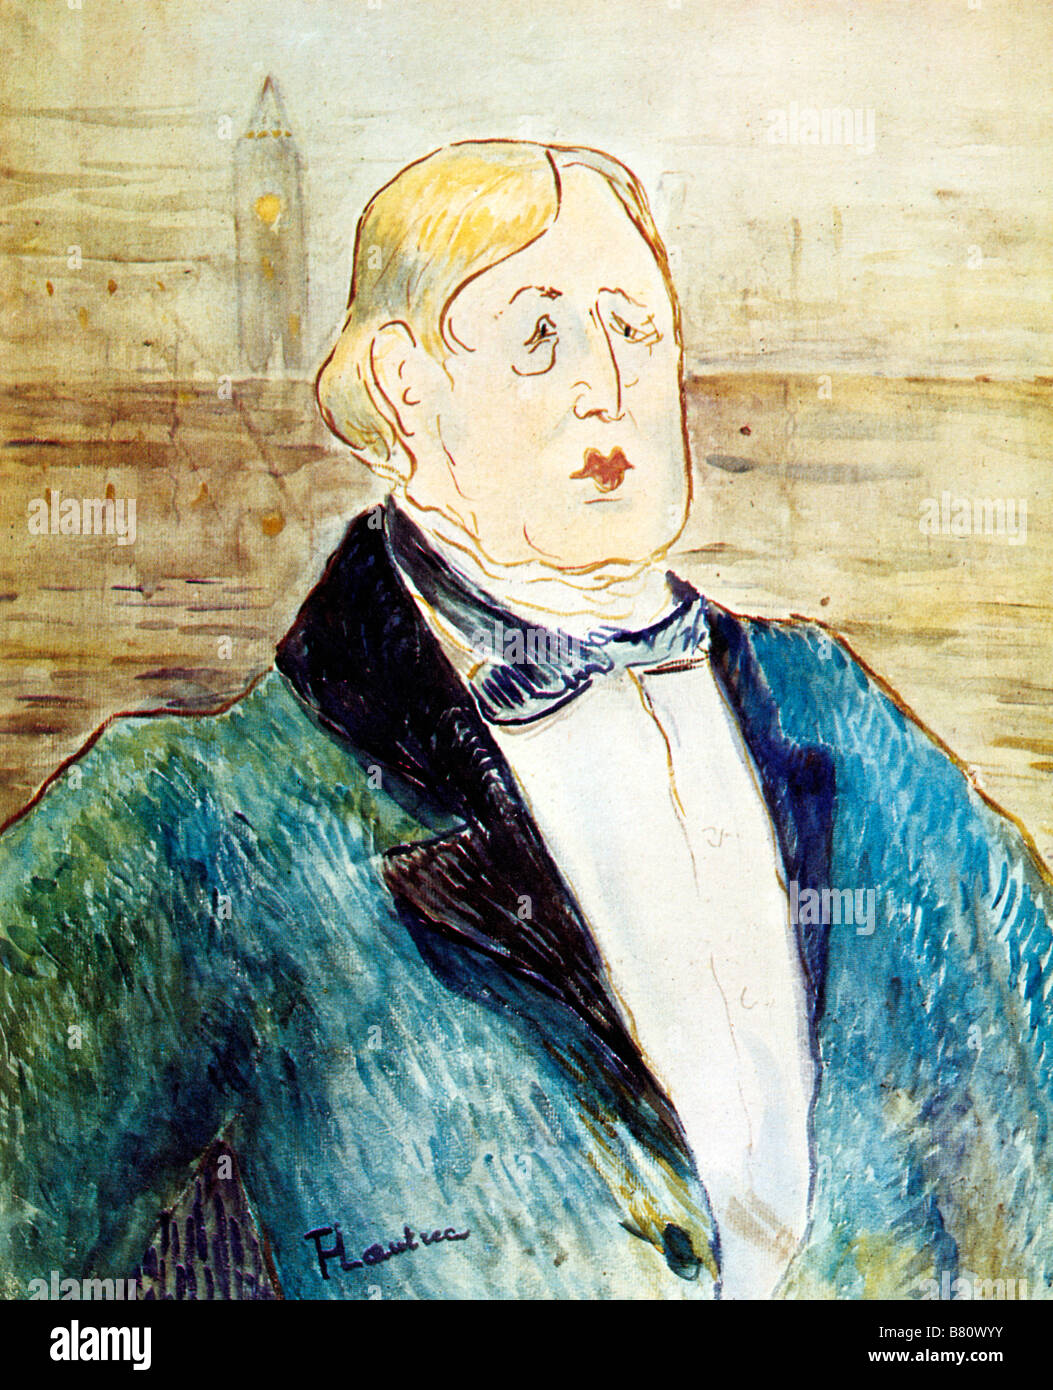 Oscar Wilde Toulouse Lautrec 1895 portrait by the French artist of the wit and writer on the eve of his trial in London Stock Photo